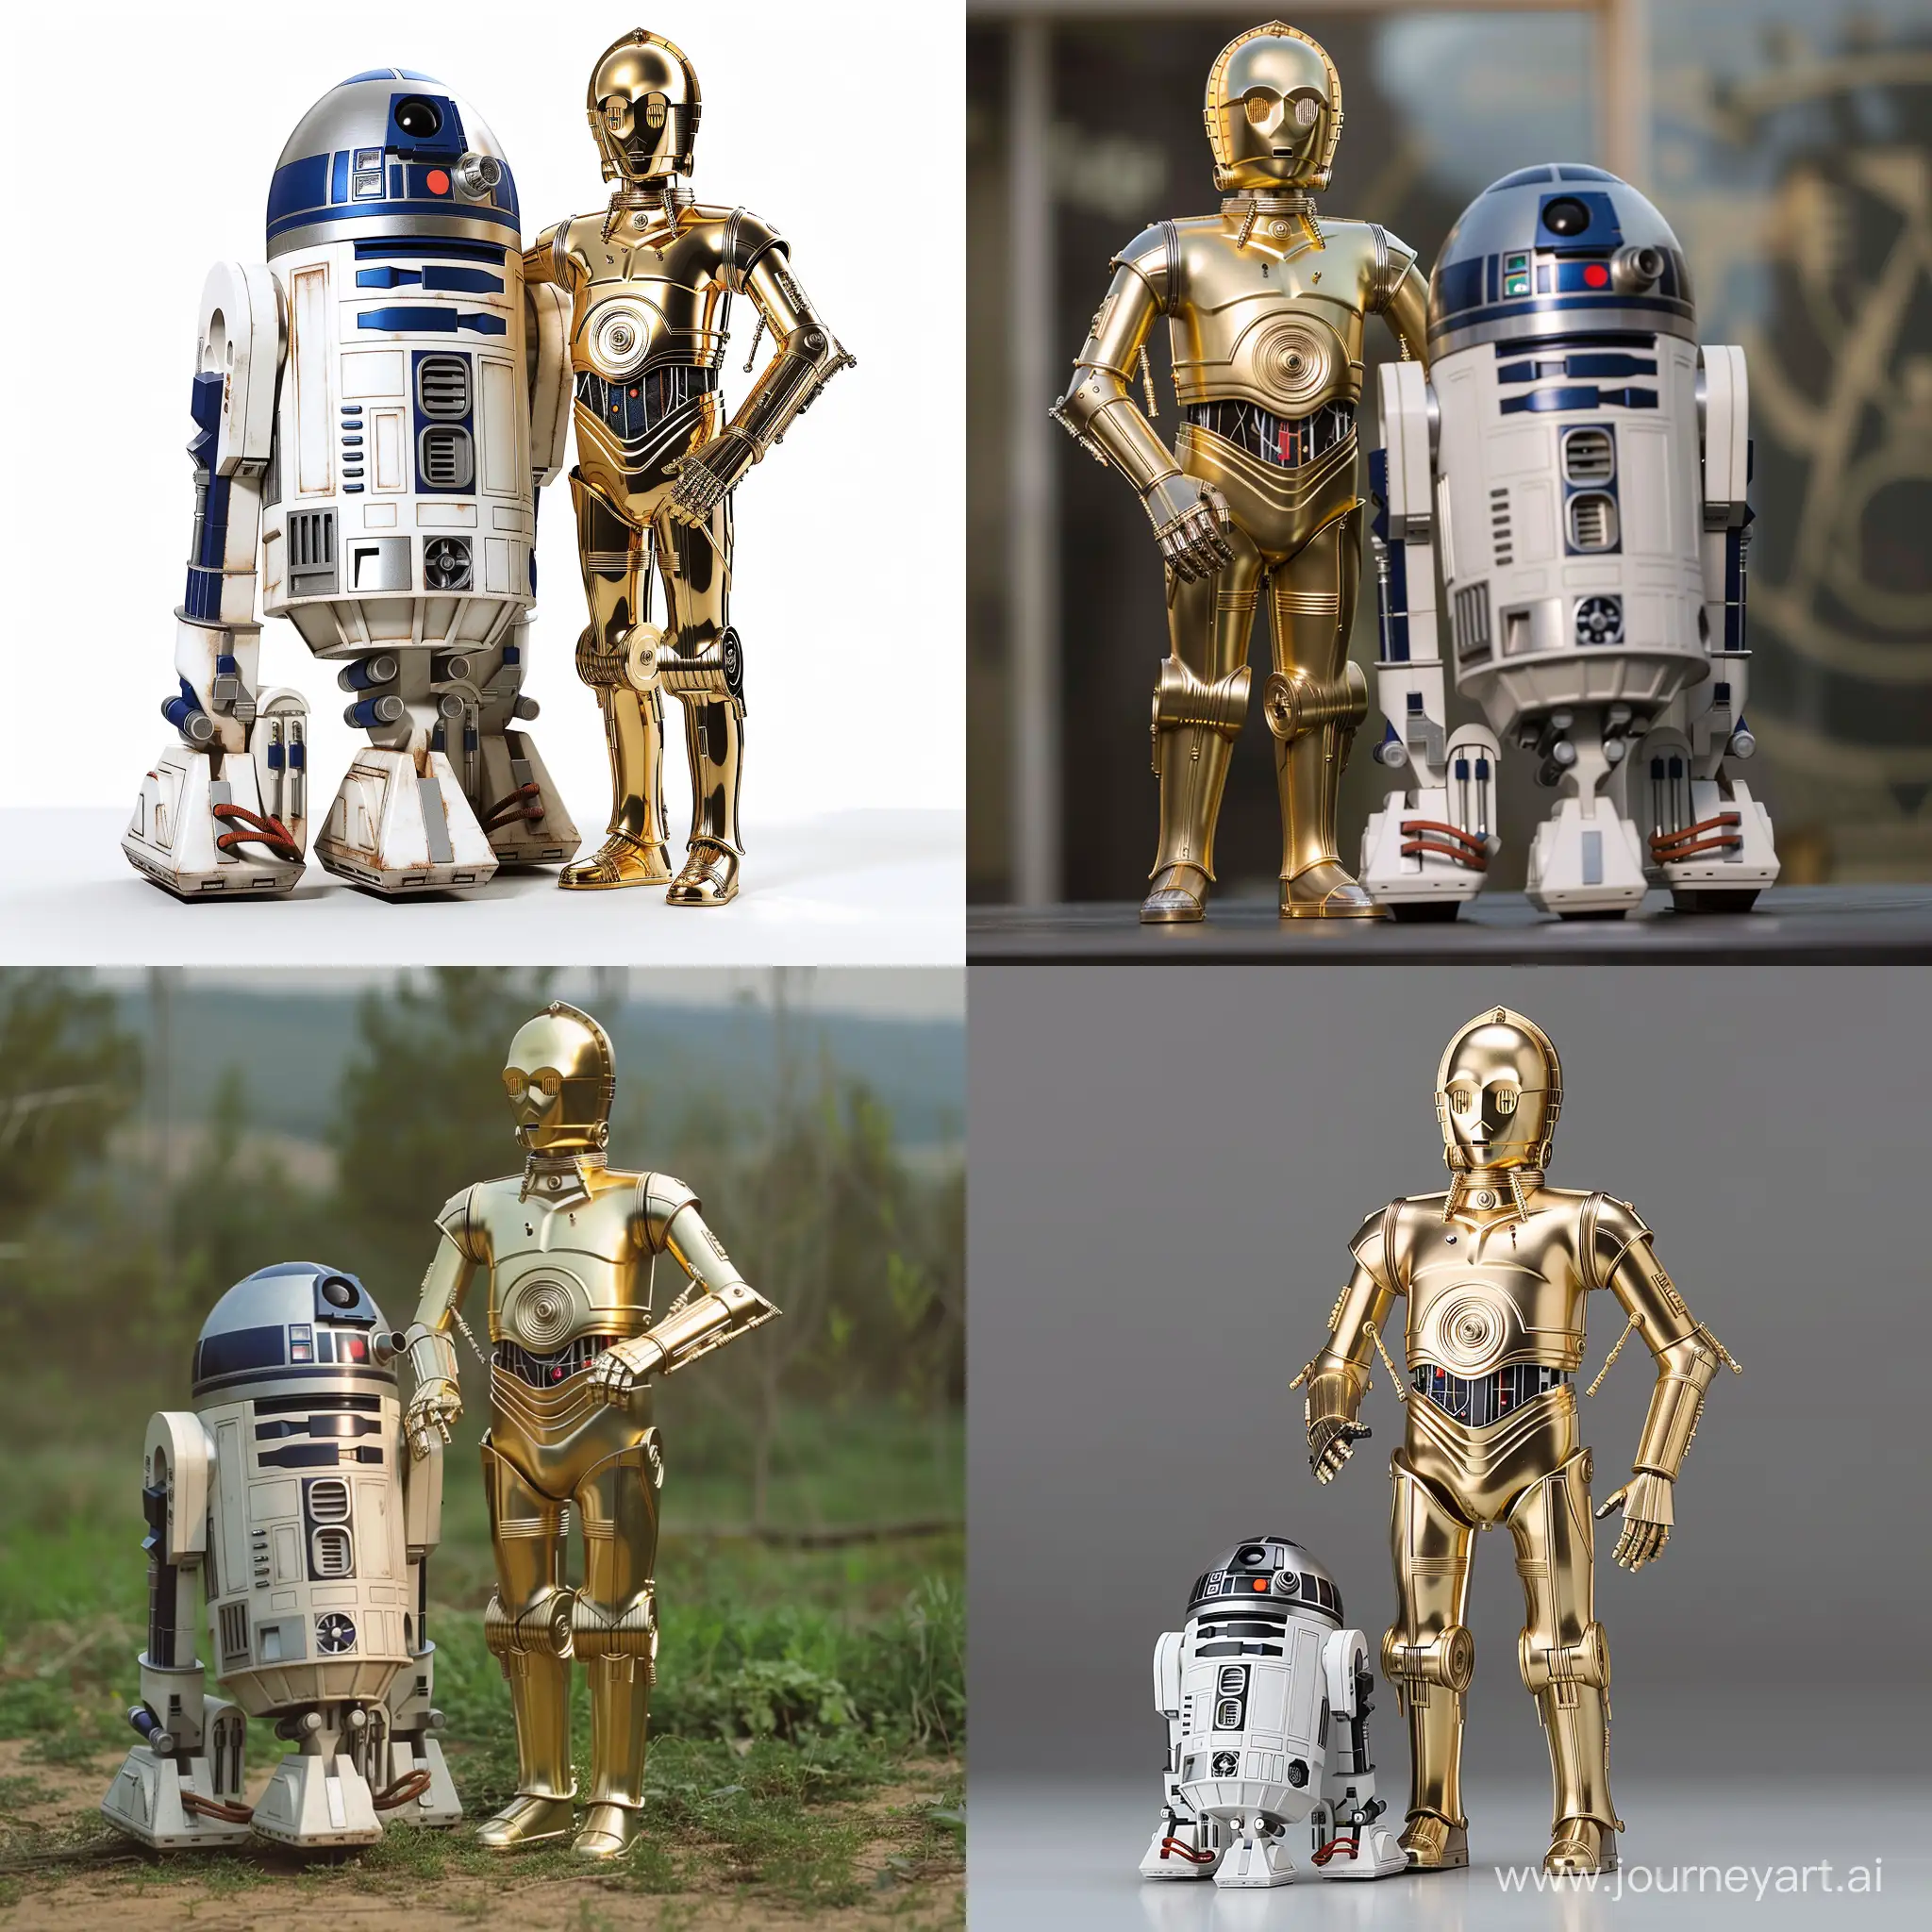 Friendly-Encounter-Robot-Duo-R2D2-and-C3PO